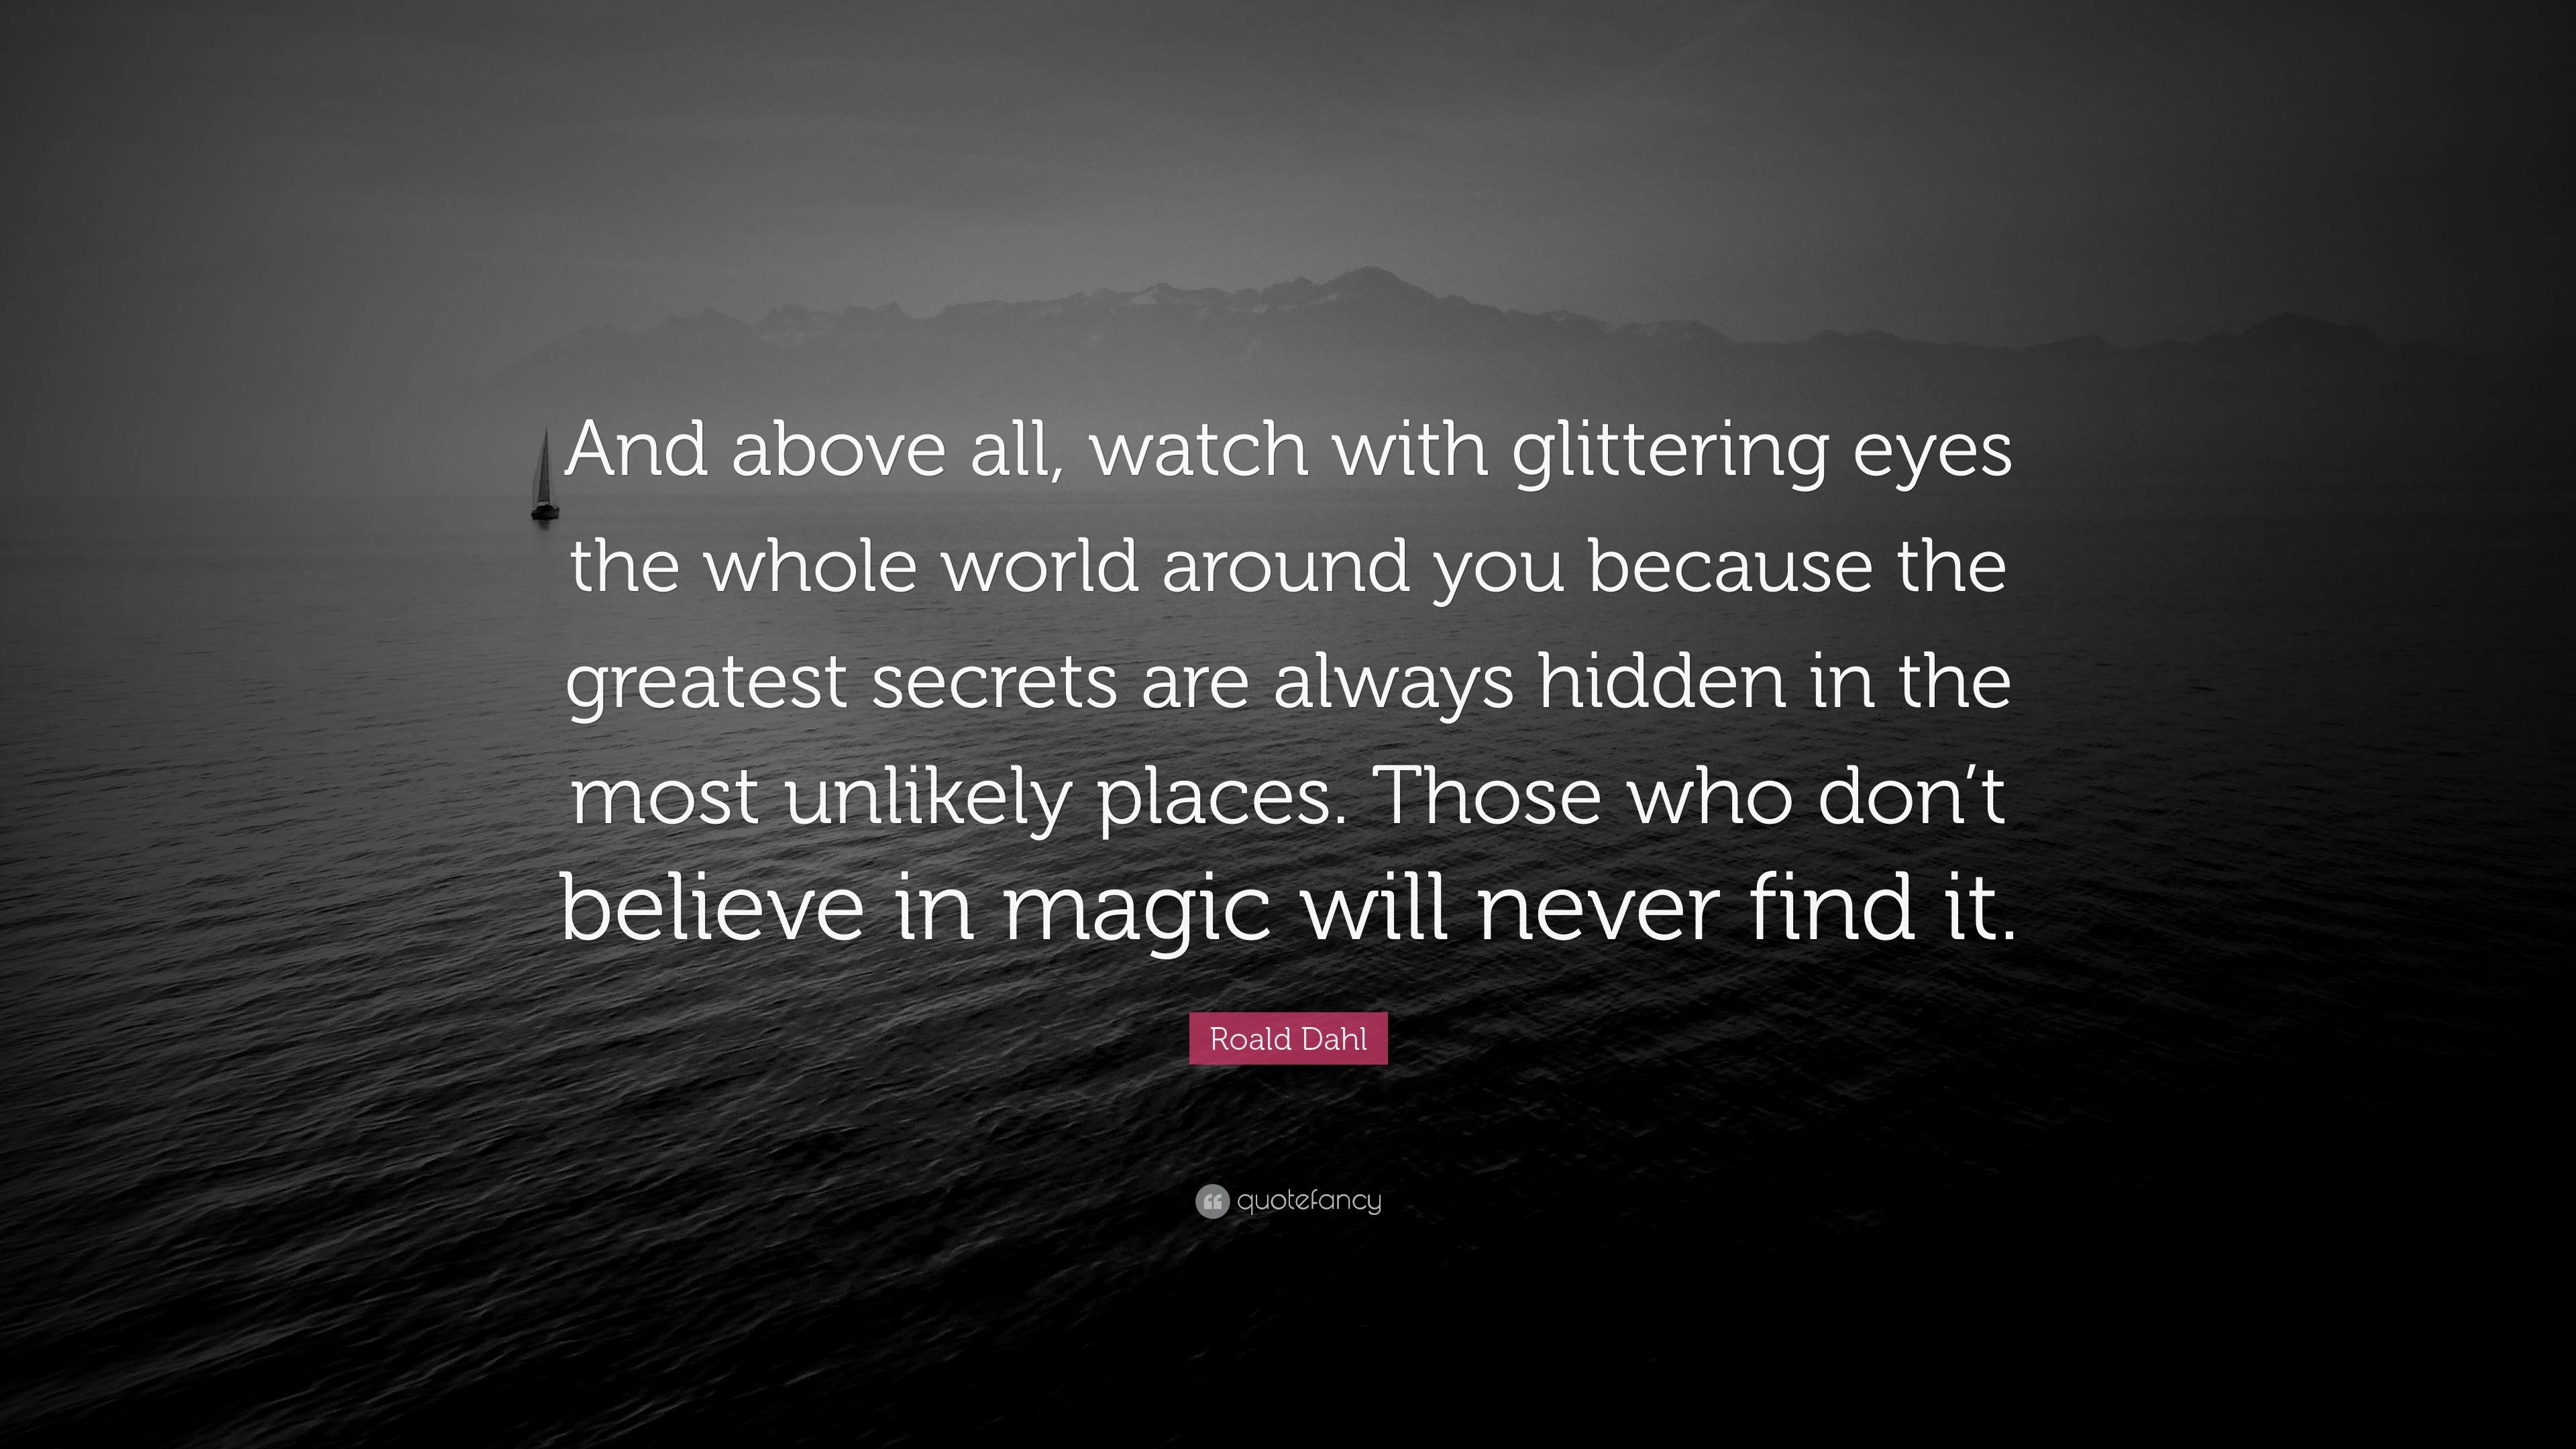 Roald Dahl Quote “and Above All Watch With Glittering